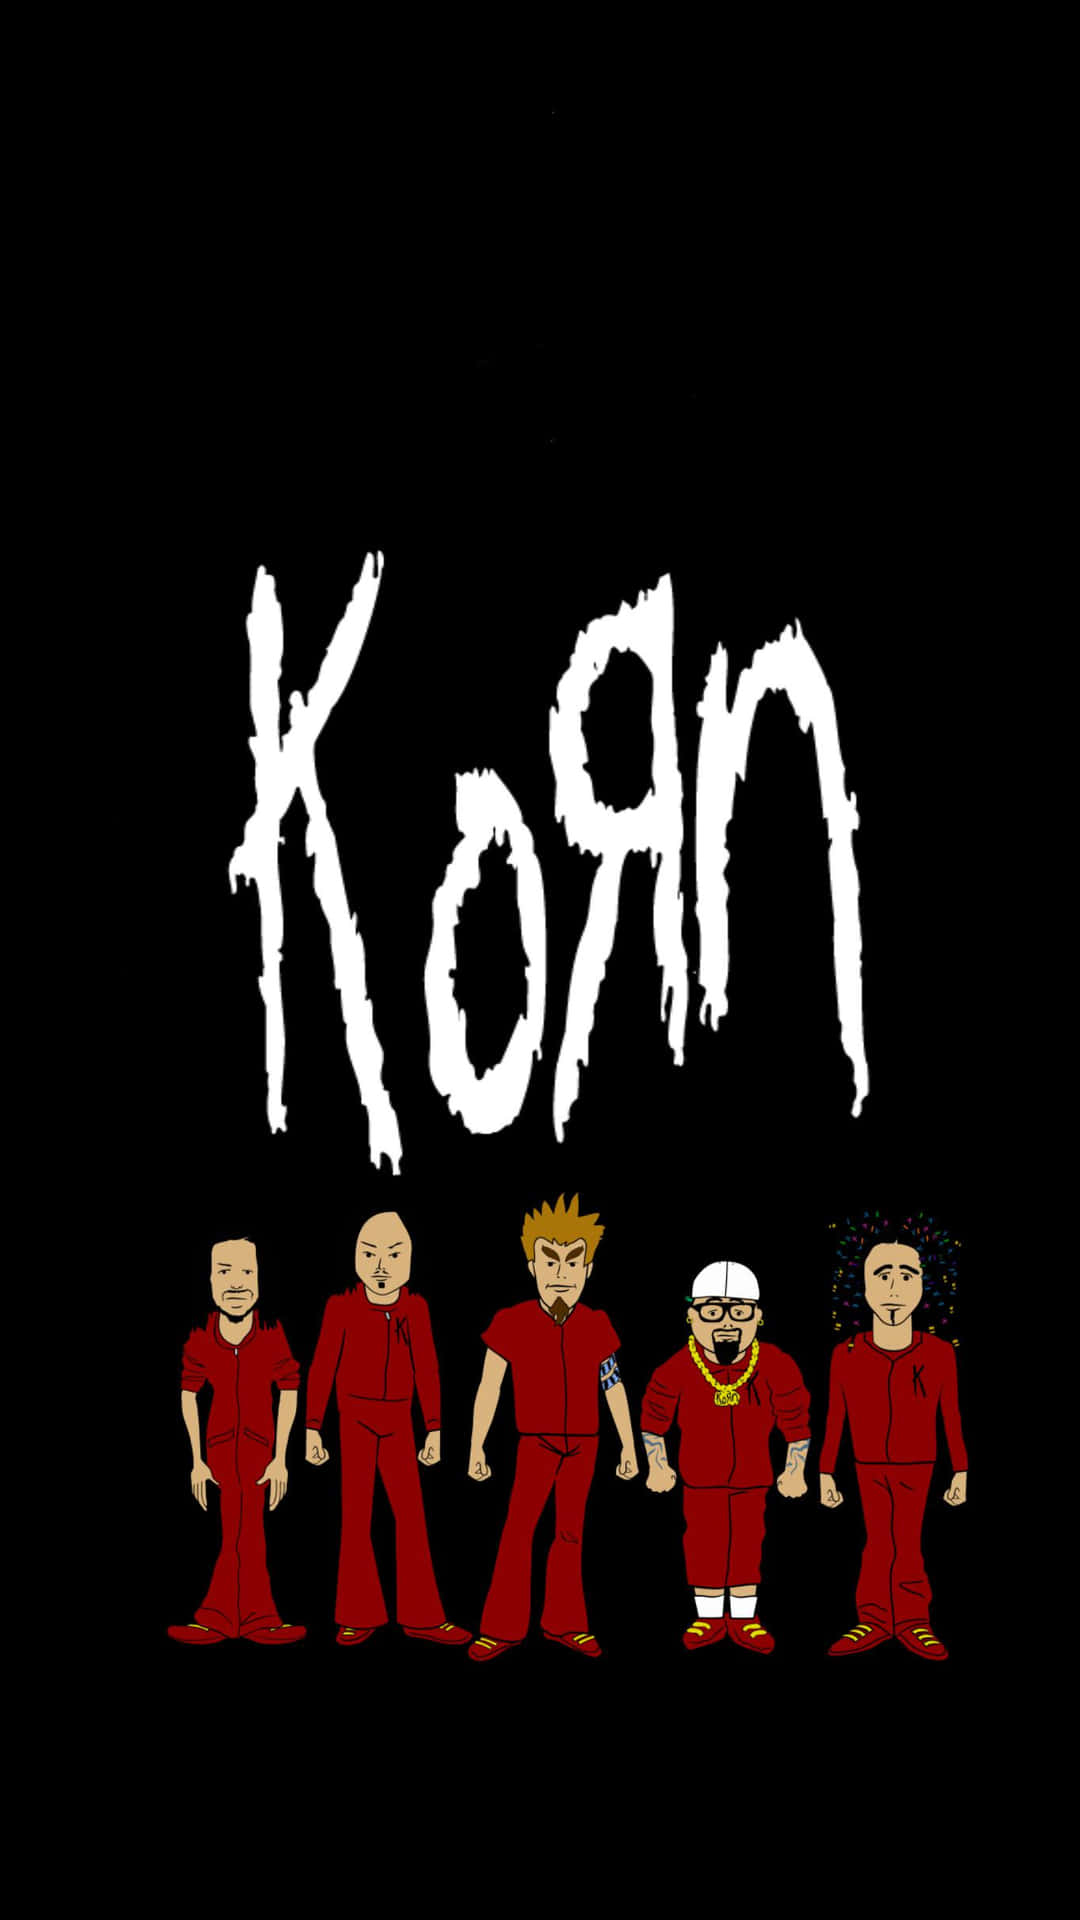 Korn performing at their sold out 2019 tour Wallpaper